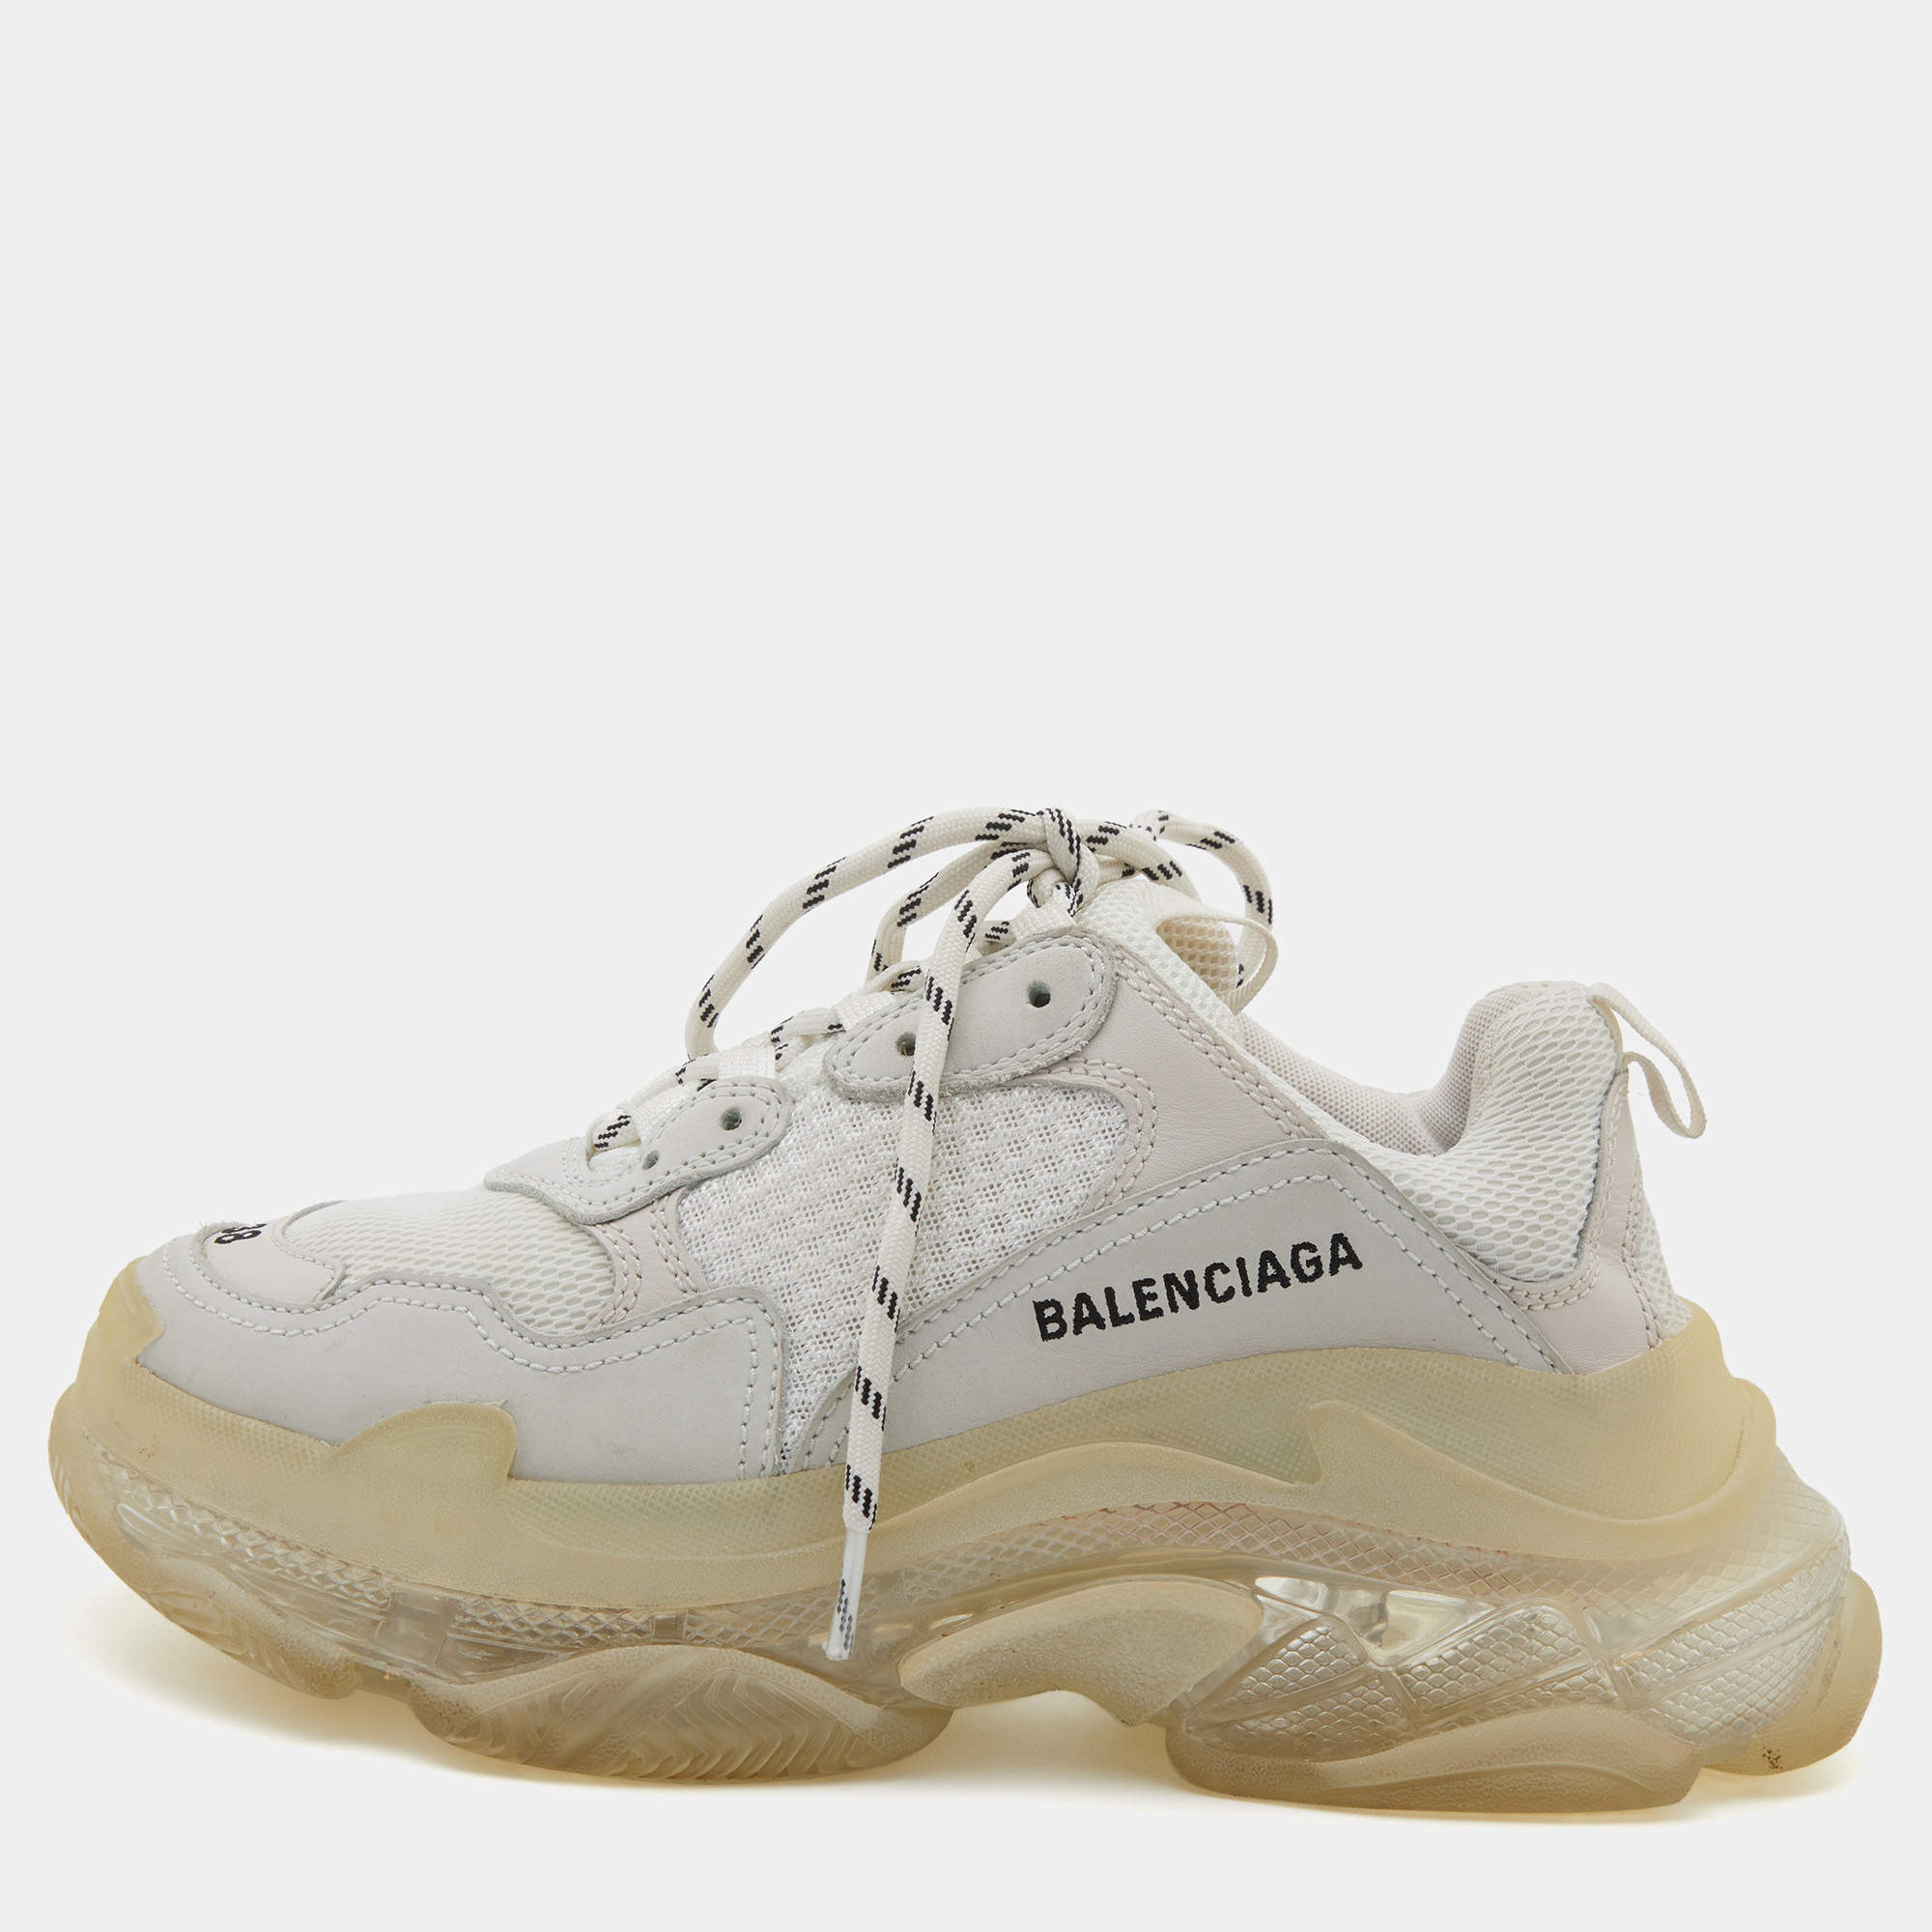 Balenciaga White Leather and Mesh Triple S Clear Sneakers Size 38